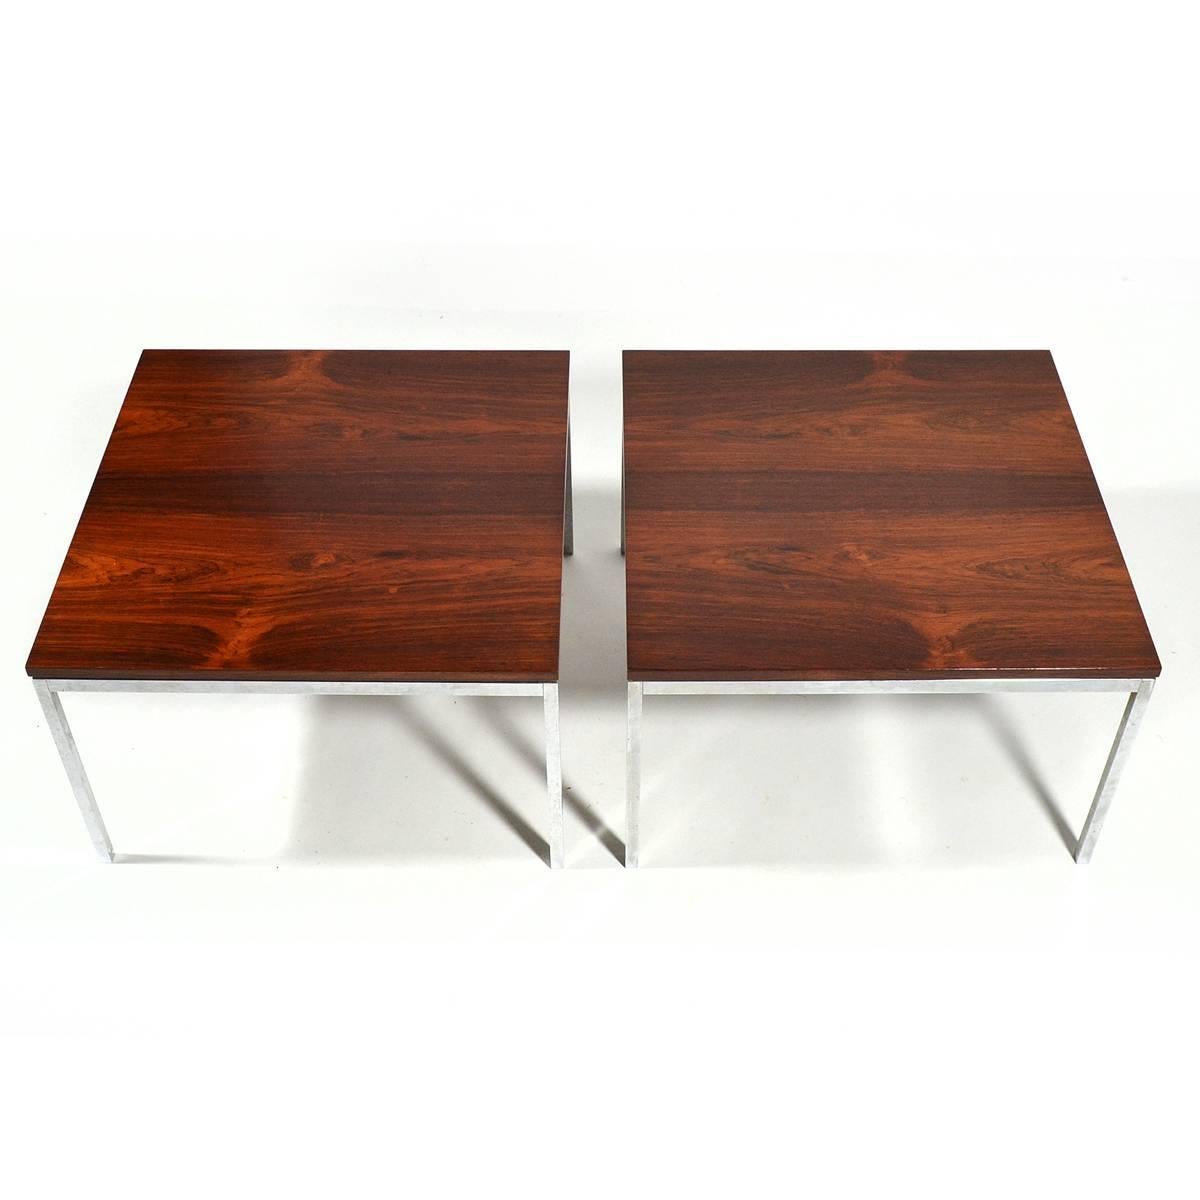 Florence Knoll's designs are famous for their understated quality, refined details and timeless appeal. These two Model 2514 MC side/ end tables are perfect examples with bases of stainless steel supporting stunning perfectly matched rosewood tops.